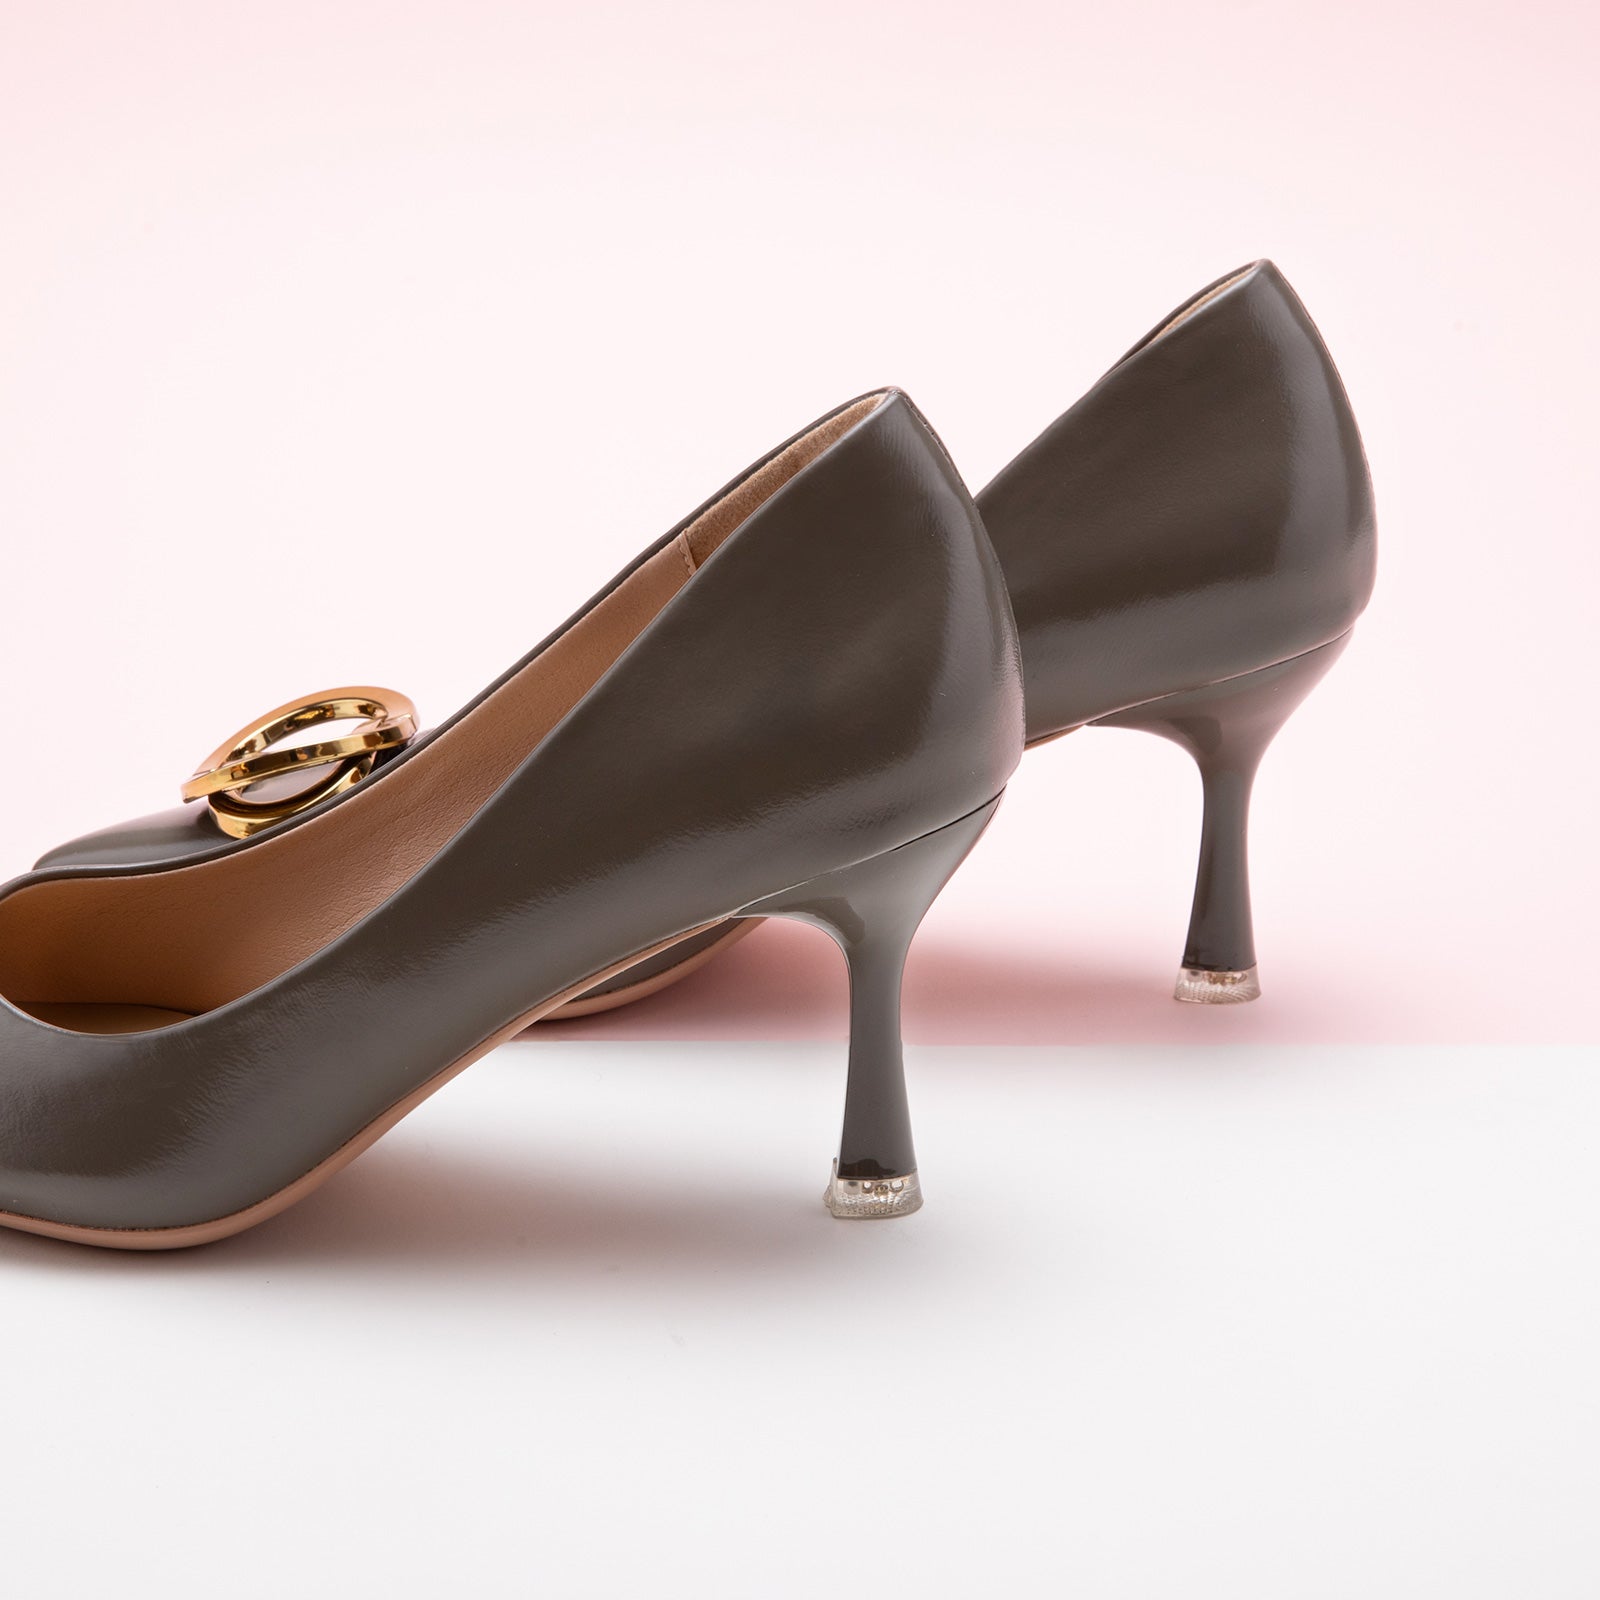 Grey Women Pumps with metal buckles, a sleek and fashionable option for urban living